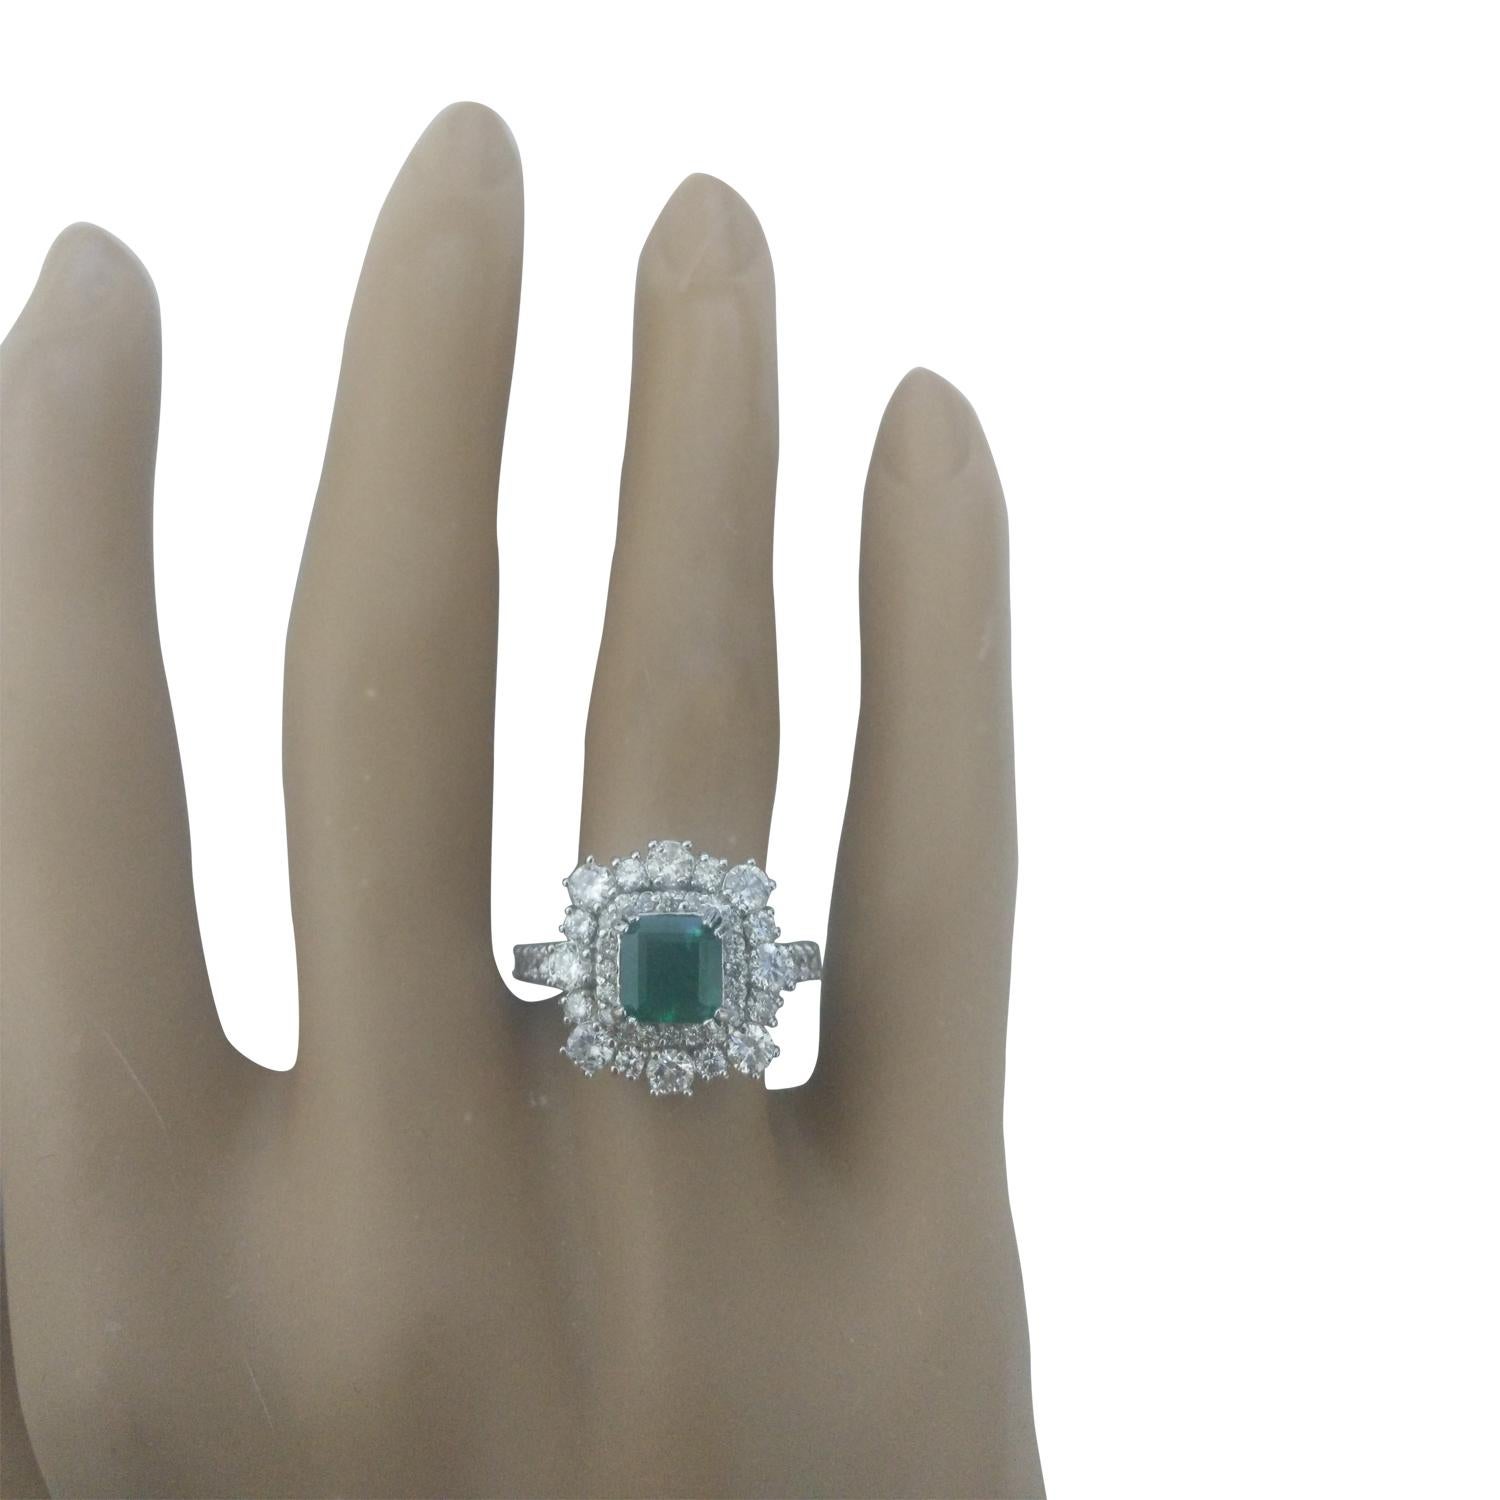 2.30 Carat Natural Emerald 14 Karat Solid White Gold Diamond Ring
Stamped: 14K
Total Ring Weight: 5.1 Grams 
Emerald Weight: 1.30 Carat (6.00x6.00 Millimeters)  
Diamond Weight: 1.00 Carat (F-G Color, VS2-SI1 Clarity)
Quantity: 44
Face Measures: